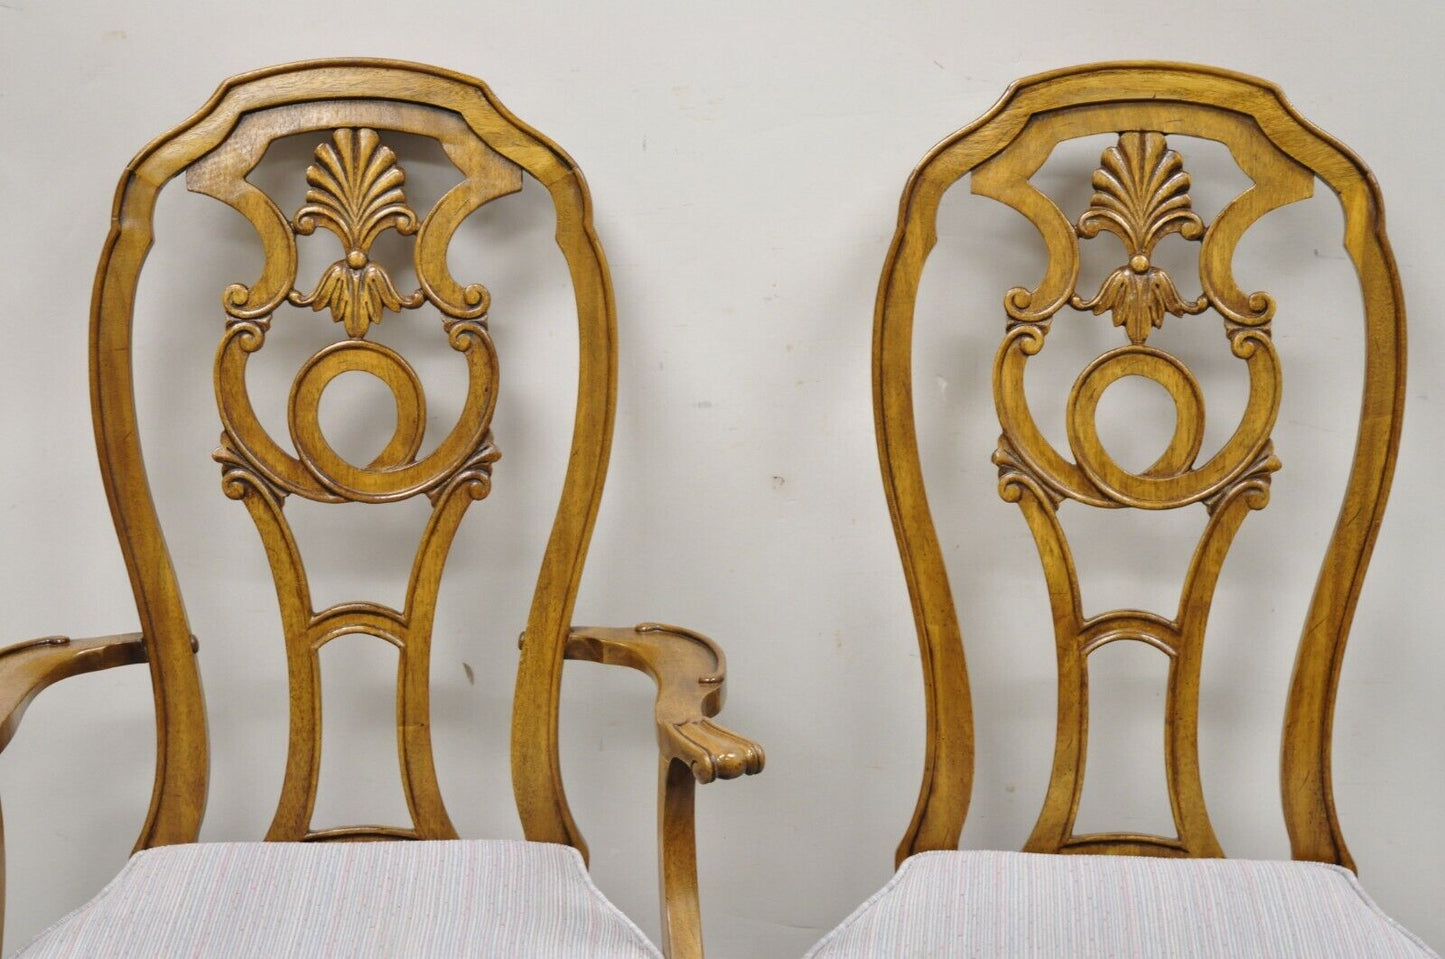 Vintage Italian Baroque Style Carved Wood Dining Chairs - Set of 6